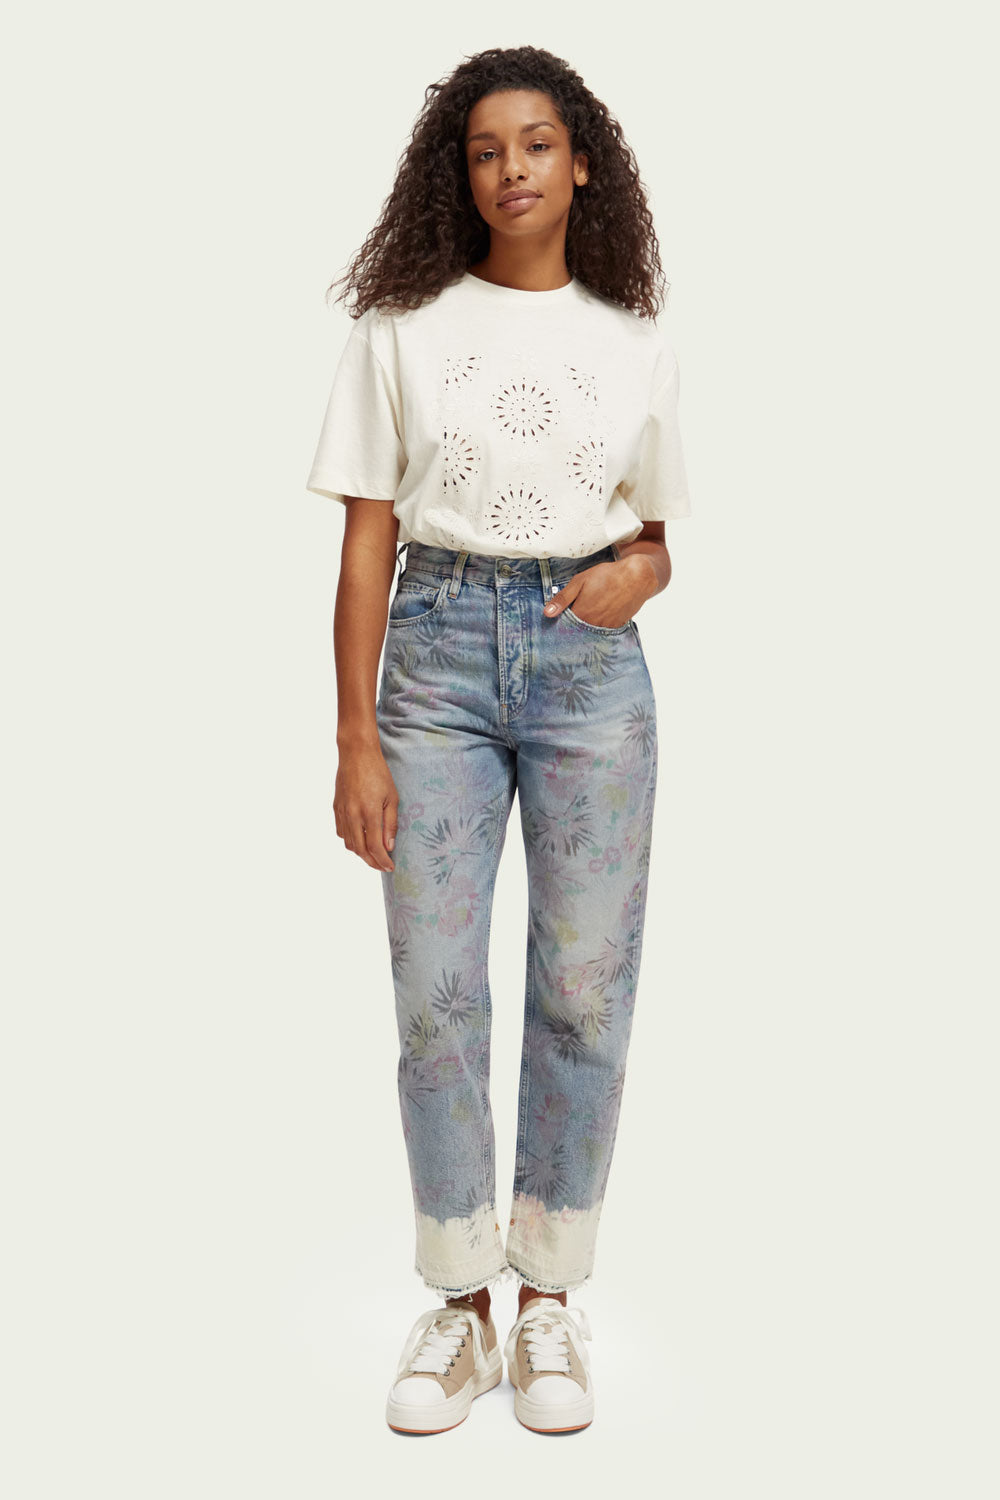 Scotch & Soda - Embroidered Loose Fit Tee - Vanilla White - Front